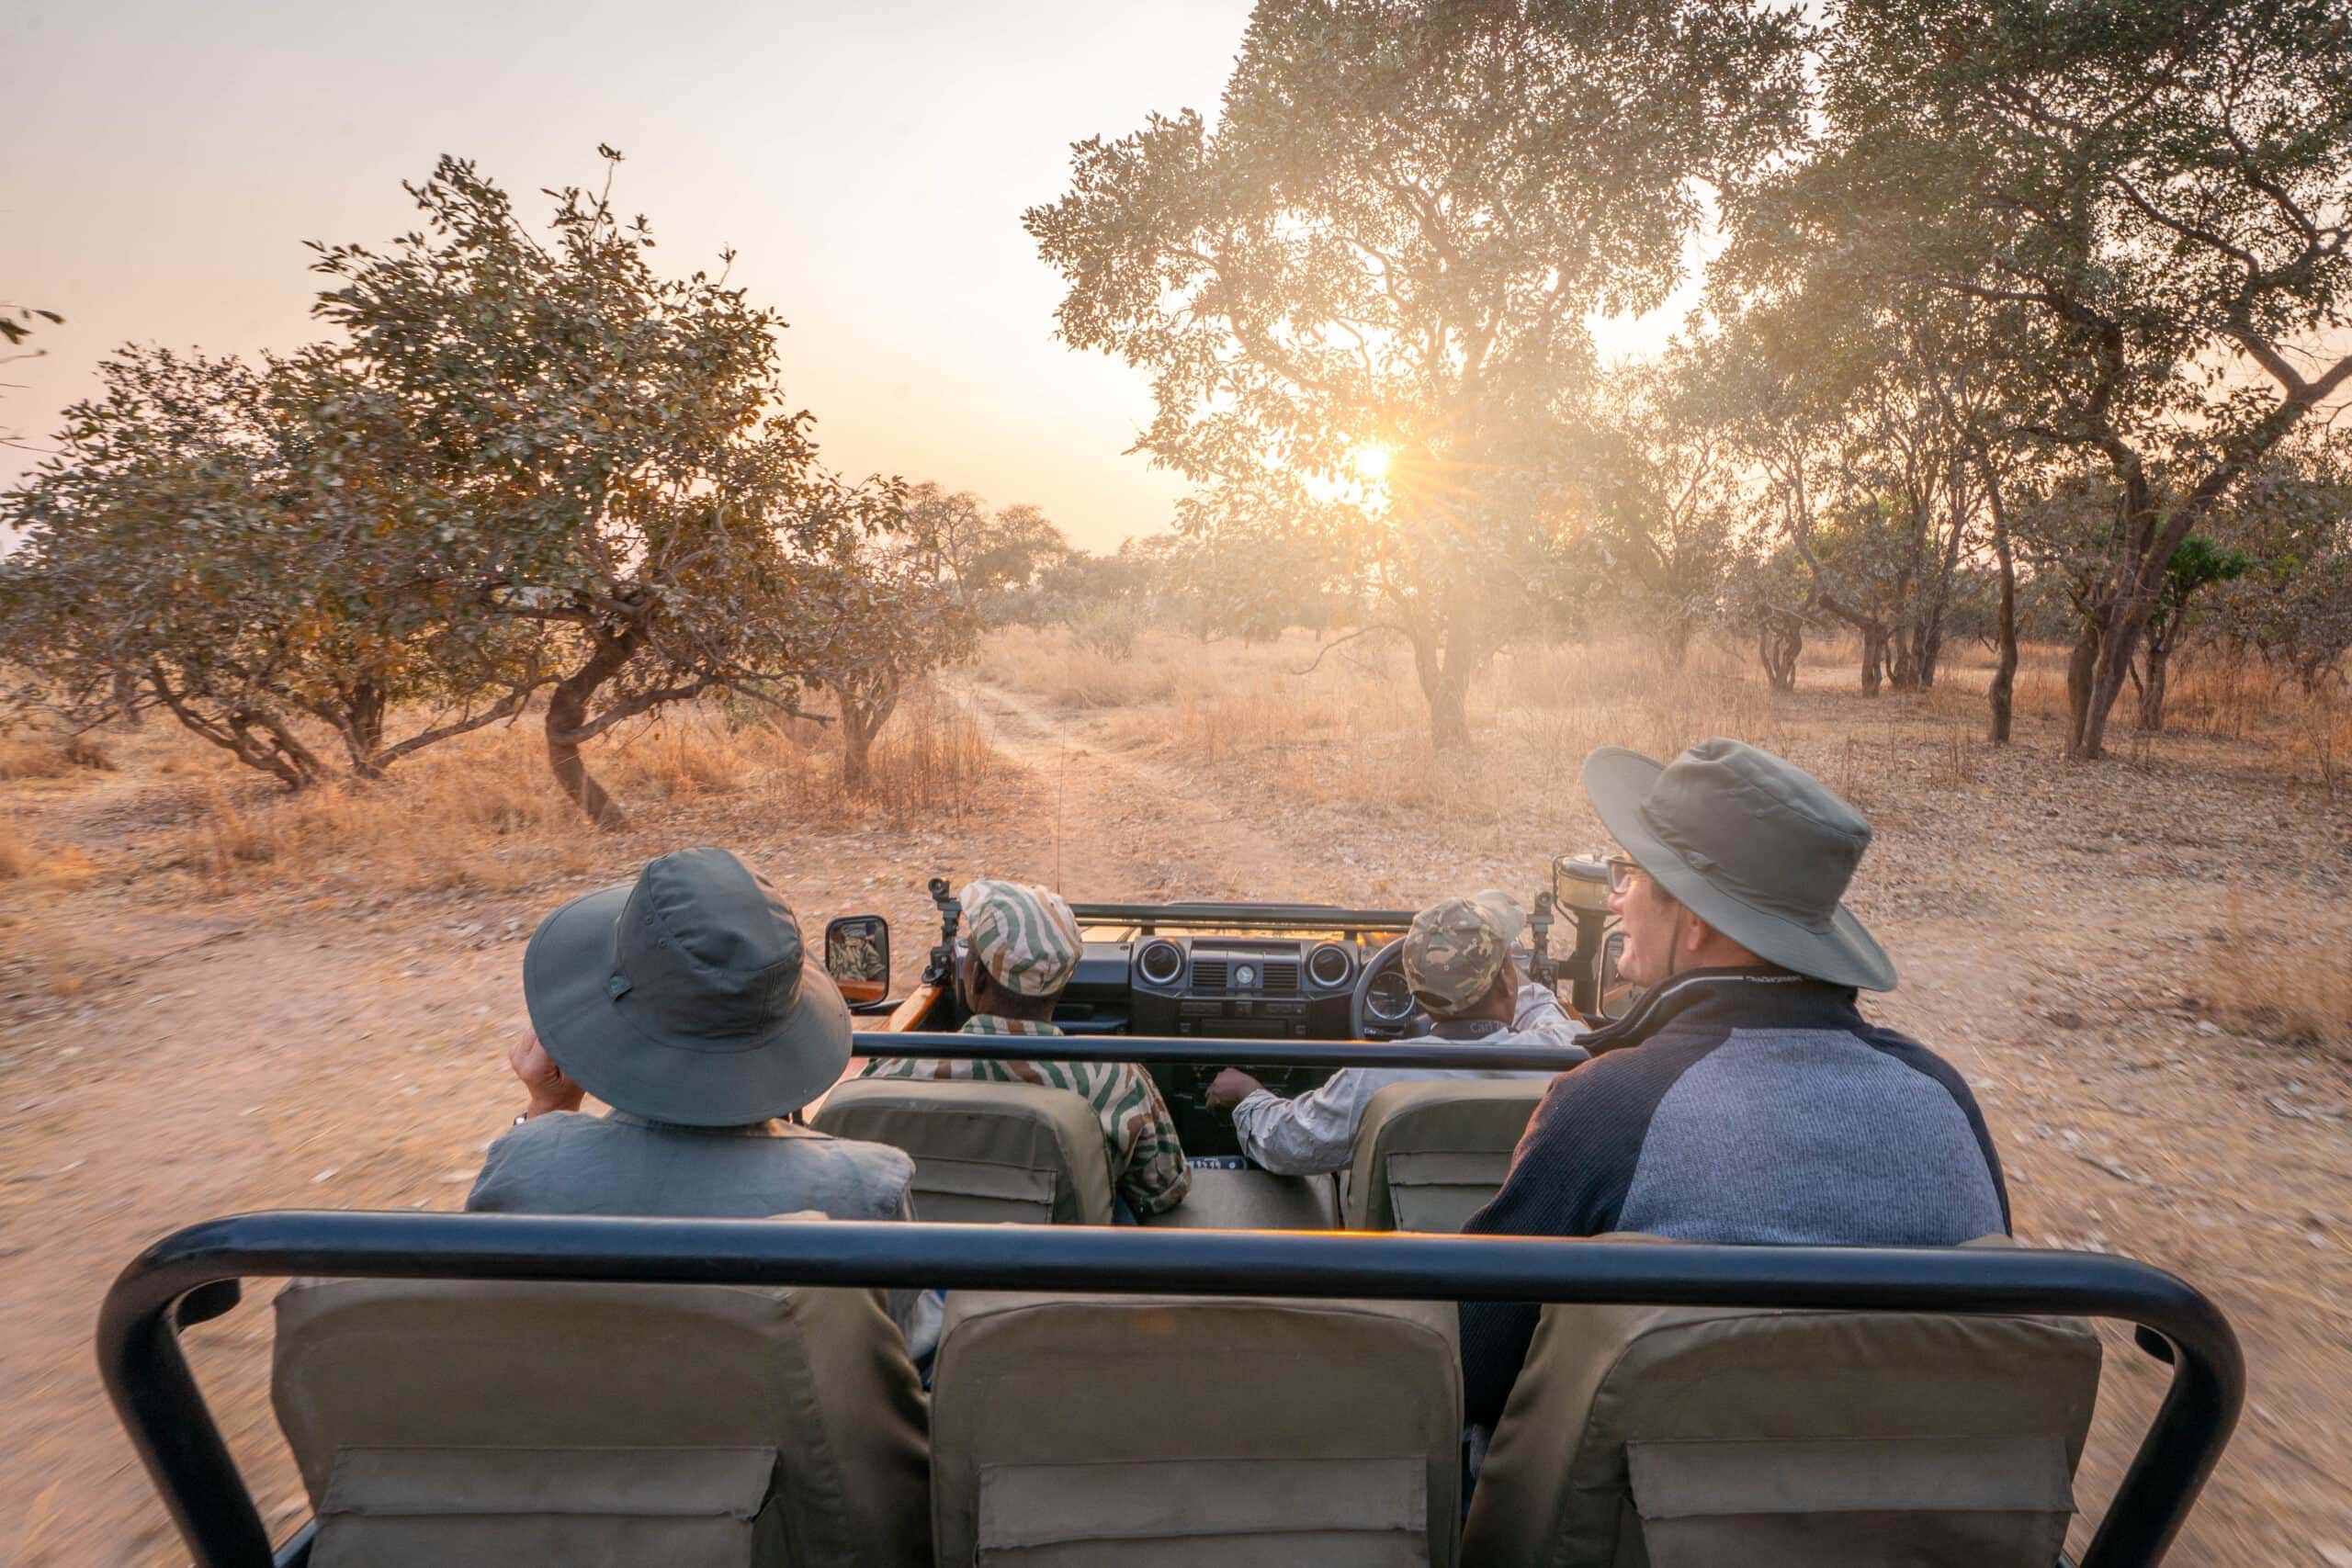 How to Have a Healthy(ish) Safari Vacation